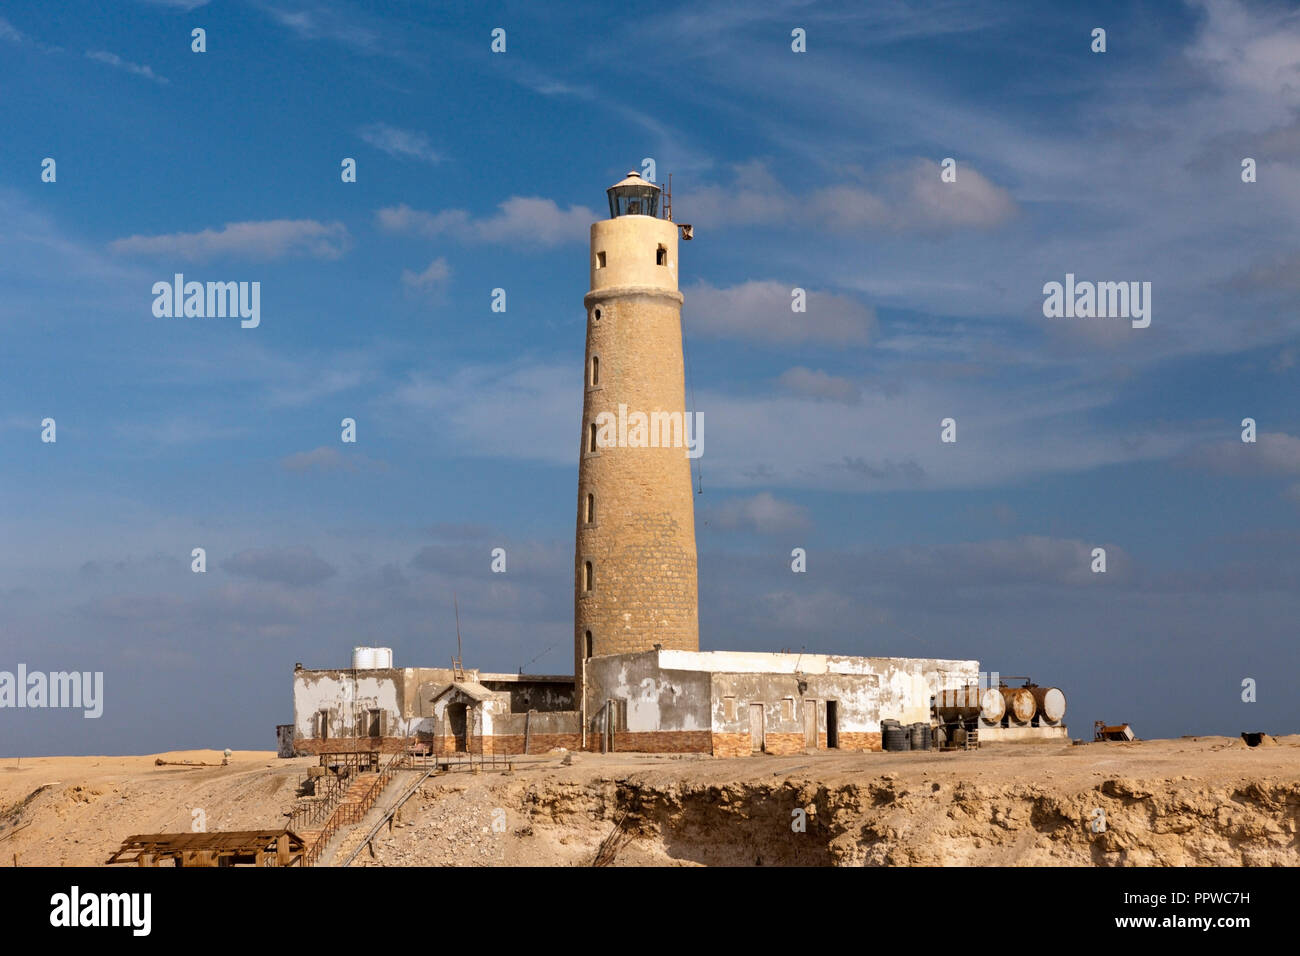 Lighthouse on Big Brother Island, Brother Islands, Red Sea, Egypt Stock Photo